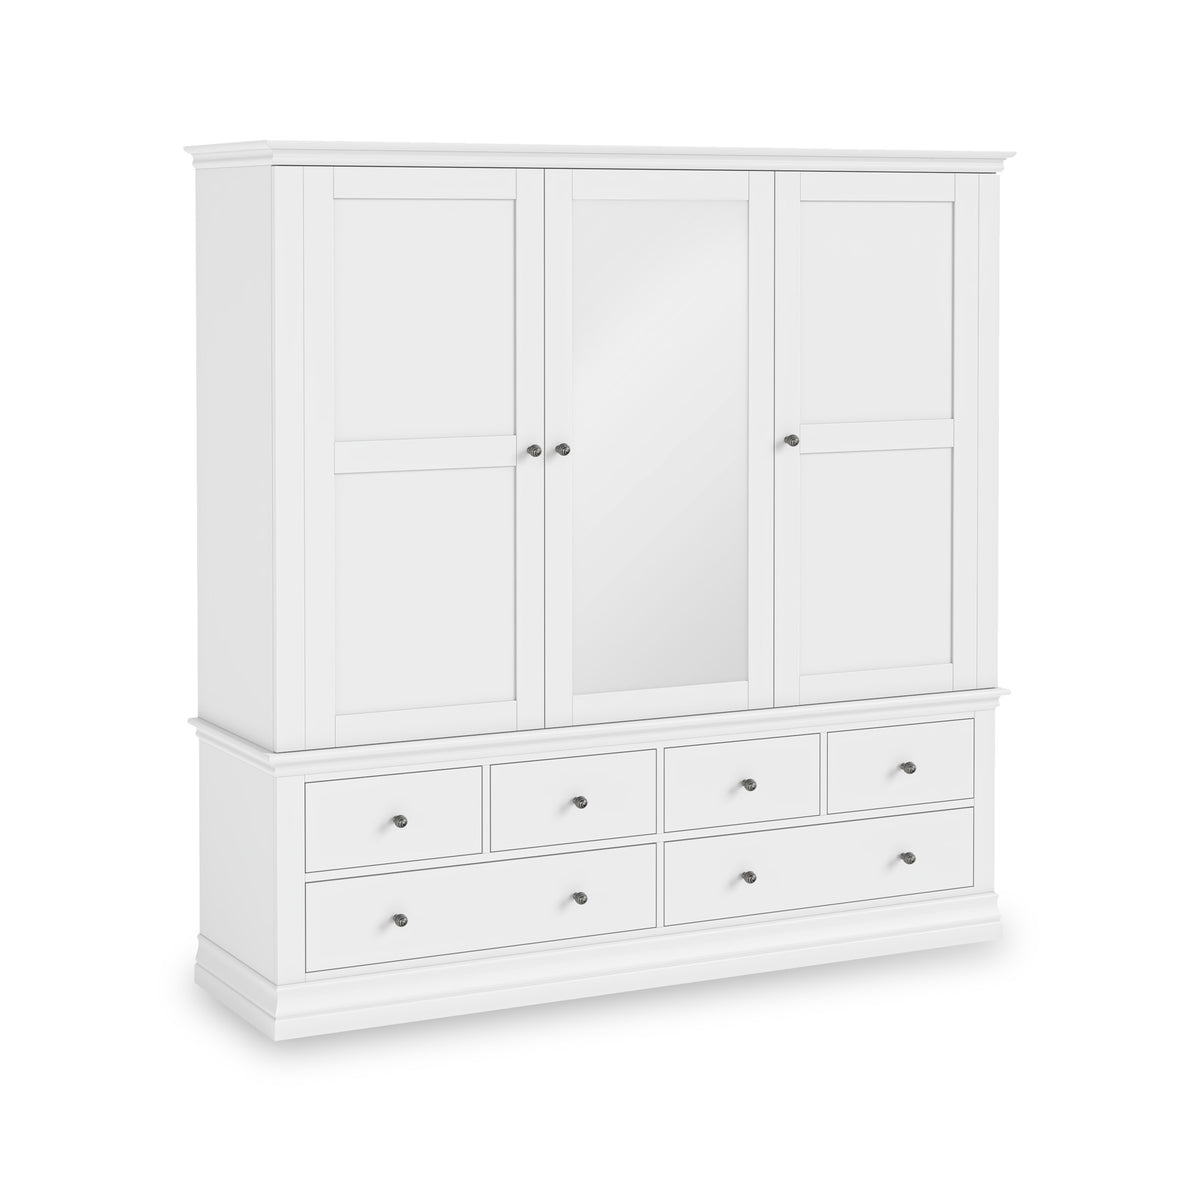 Porter White Triple Wardrobe with 6 Drawers from Roseland Furniture